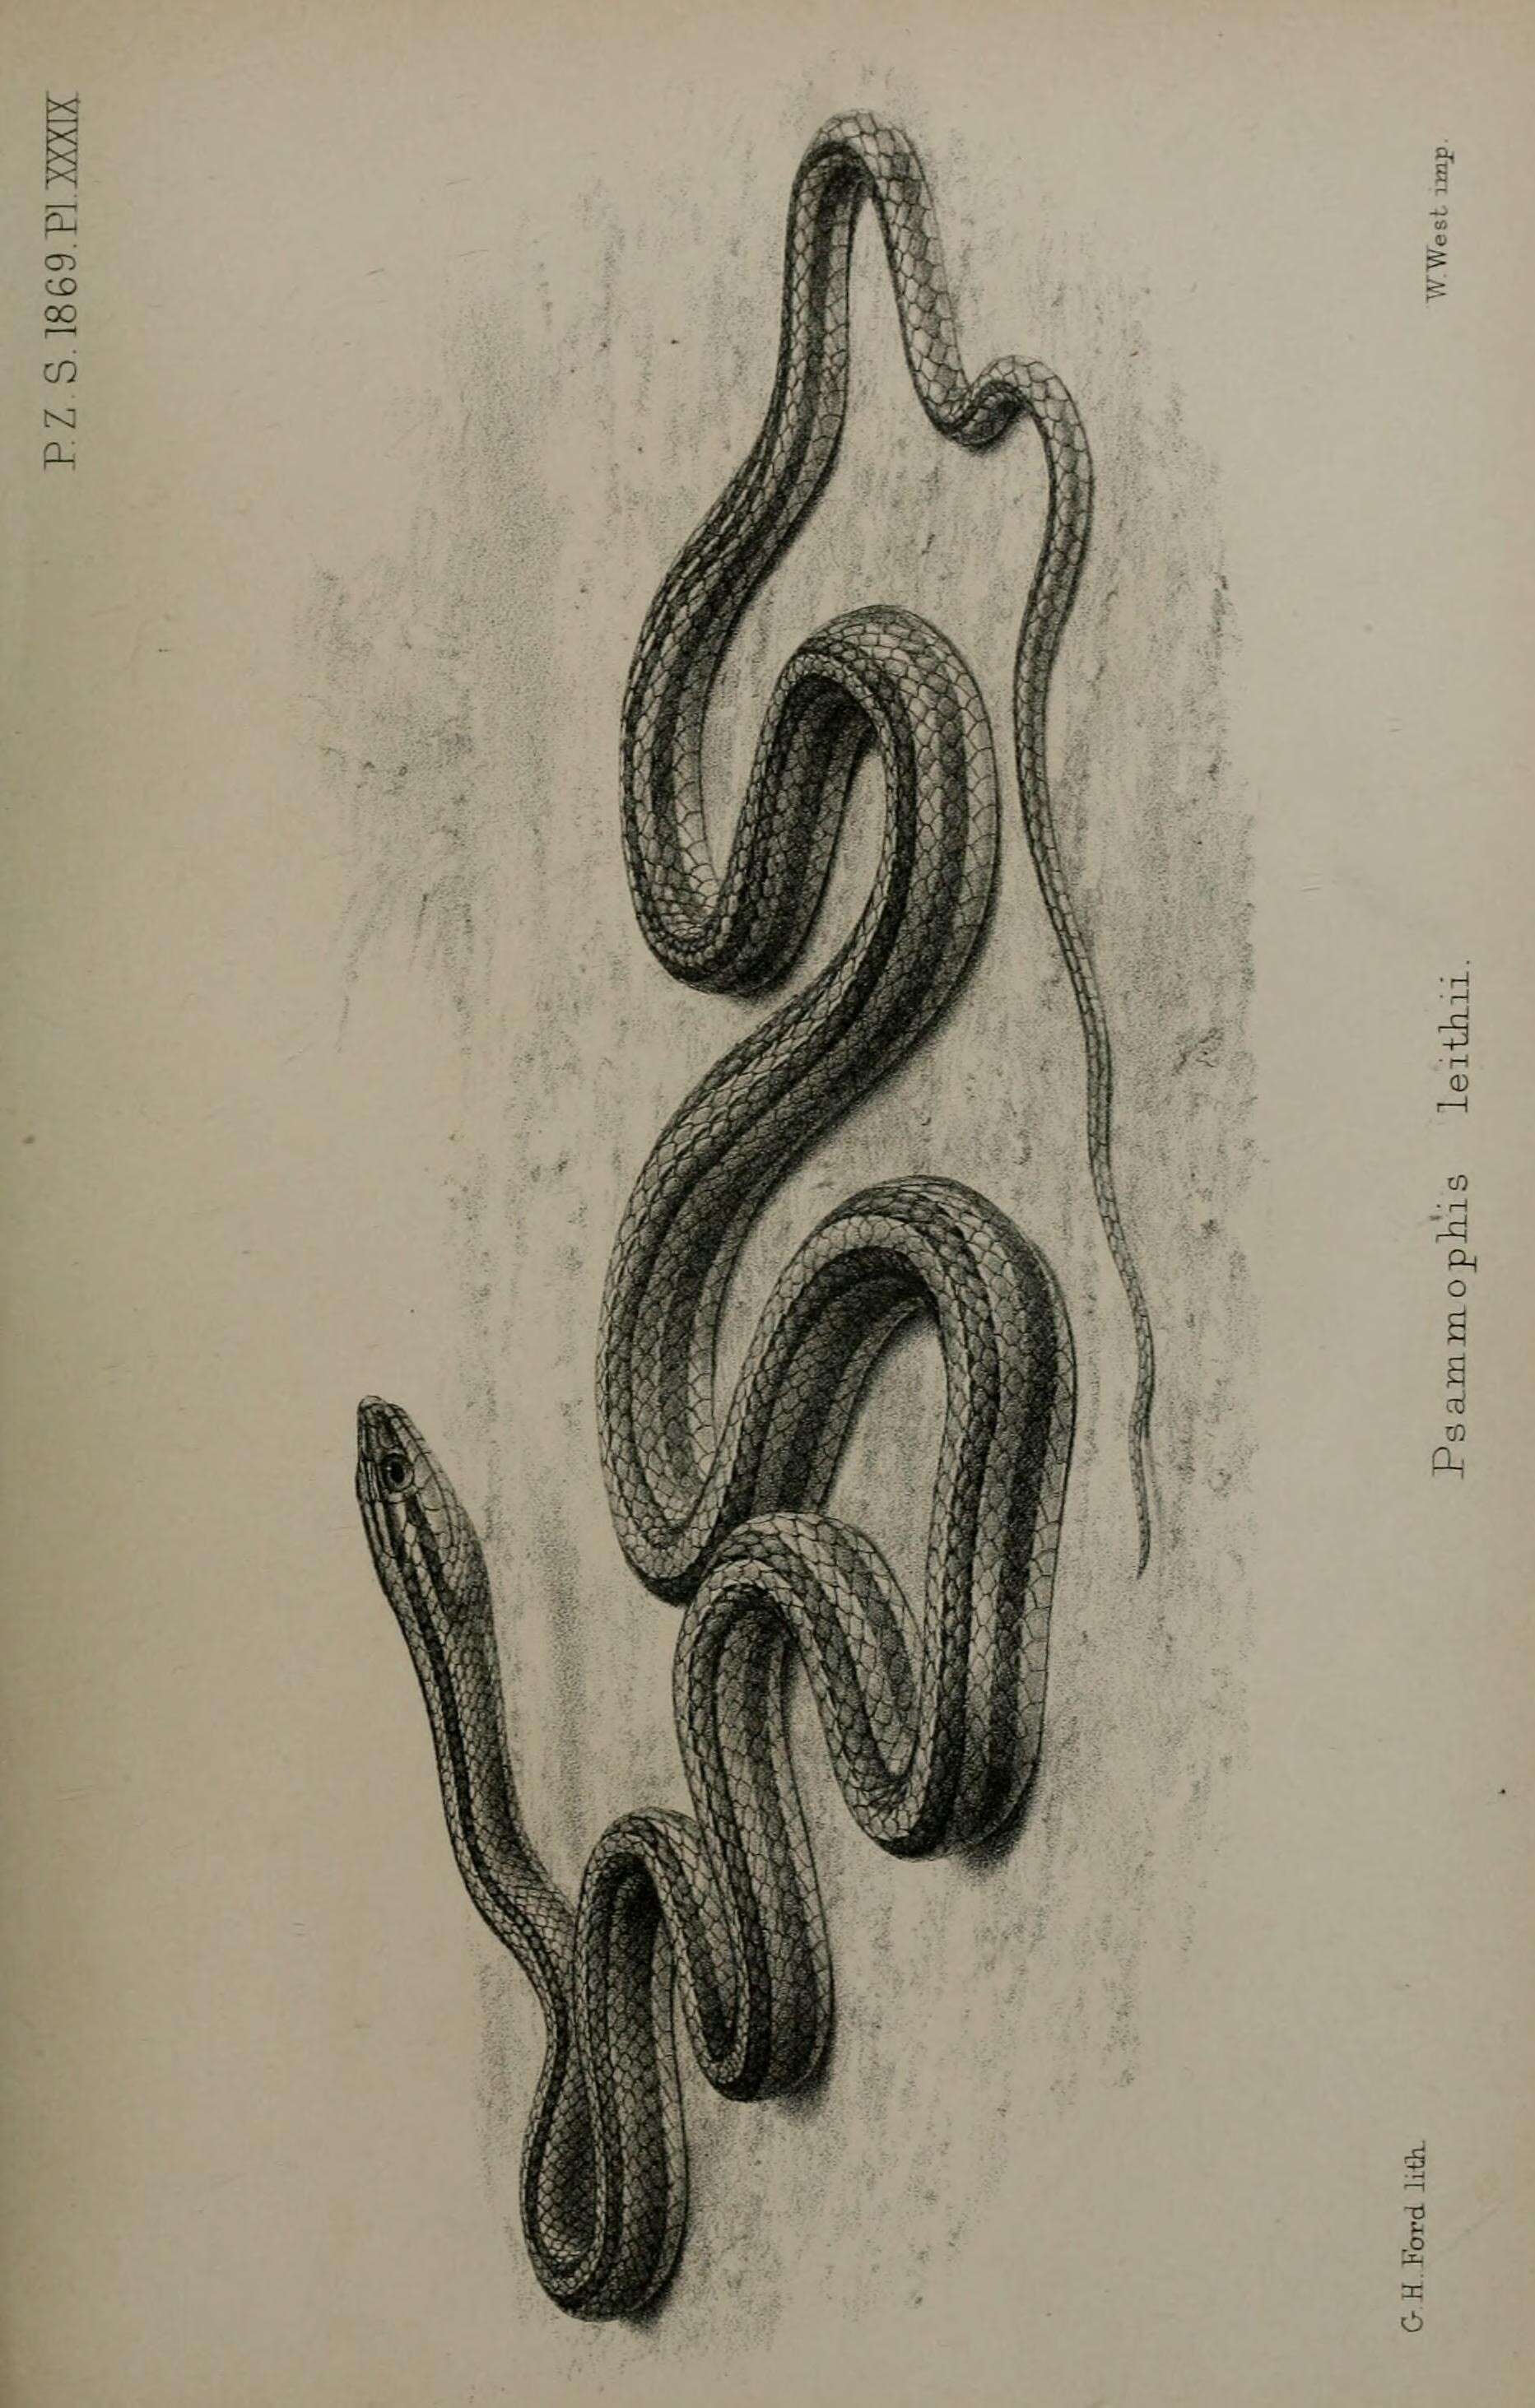 Image of Psammophis leithii Günther 1869